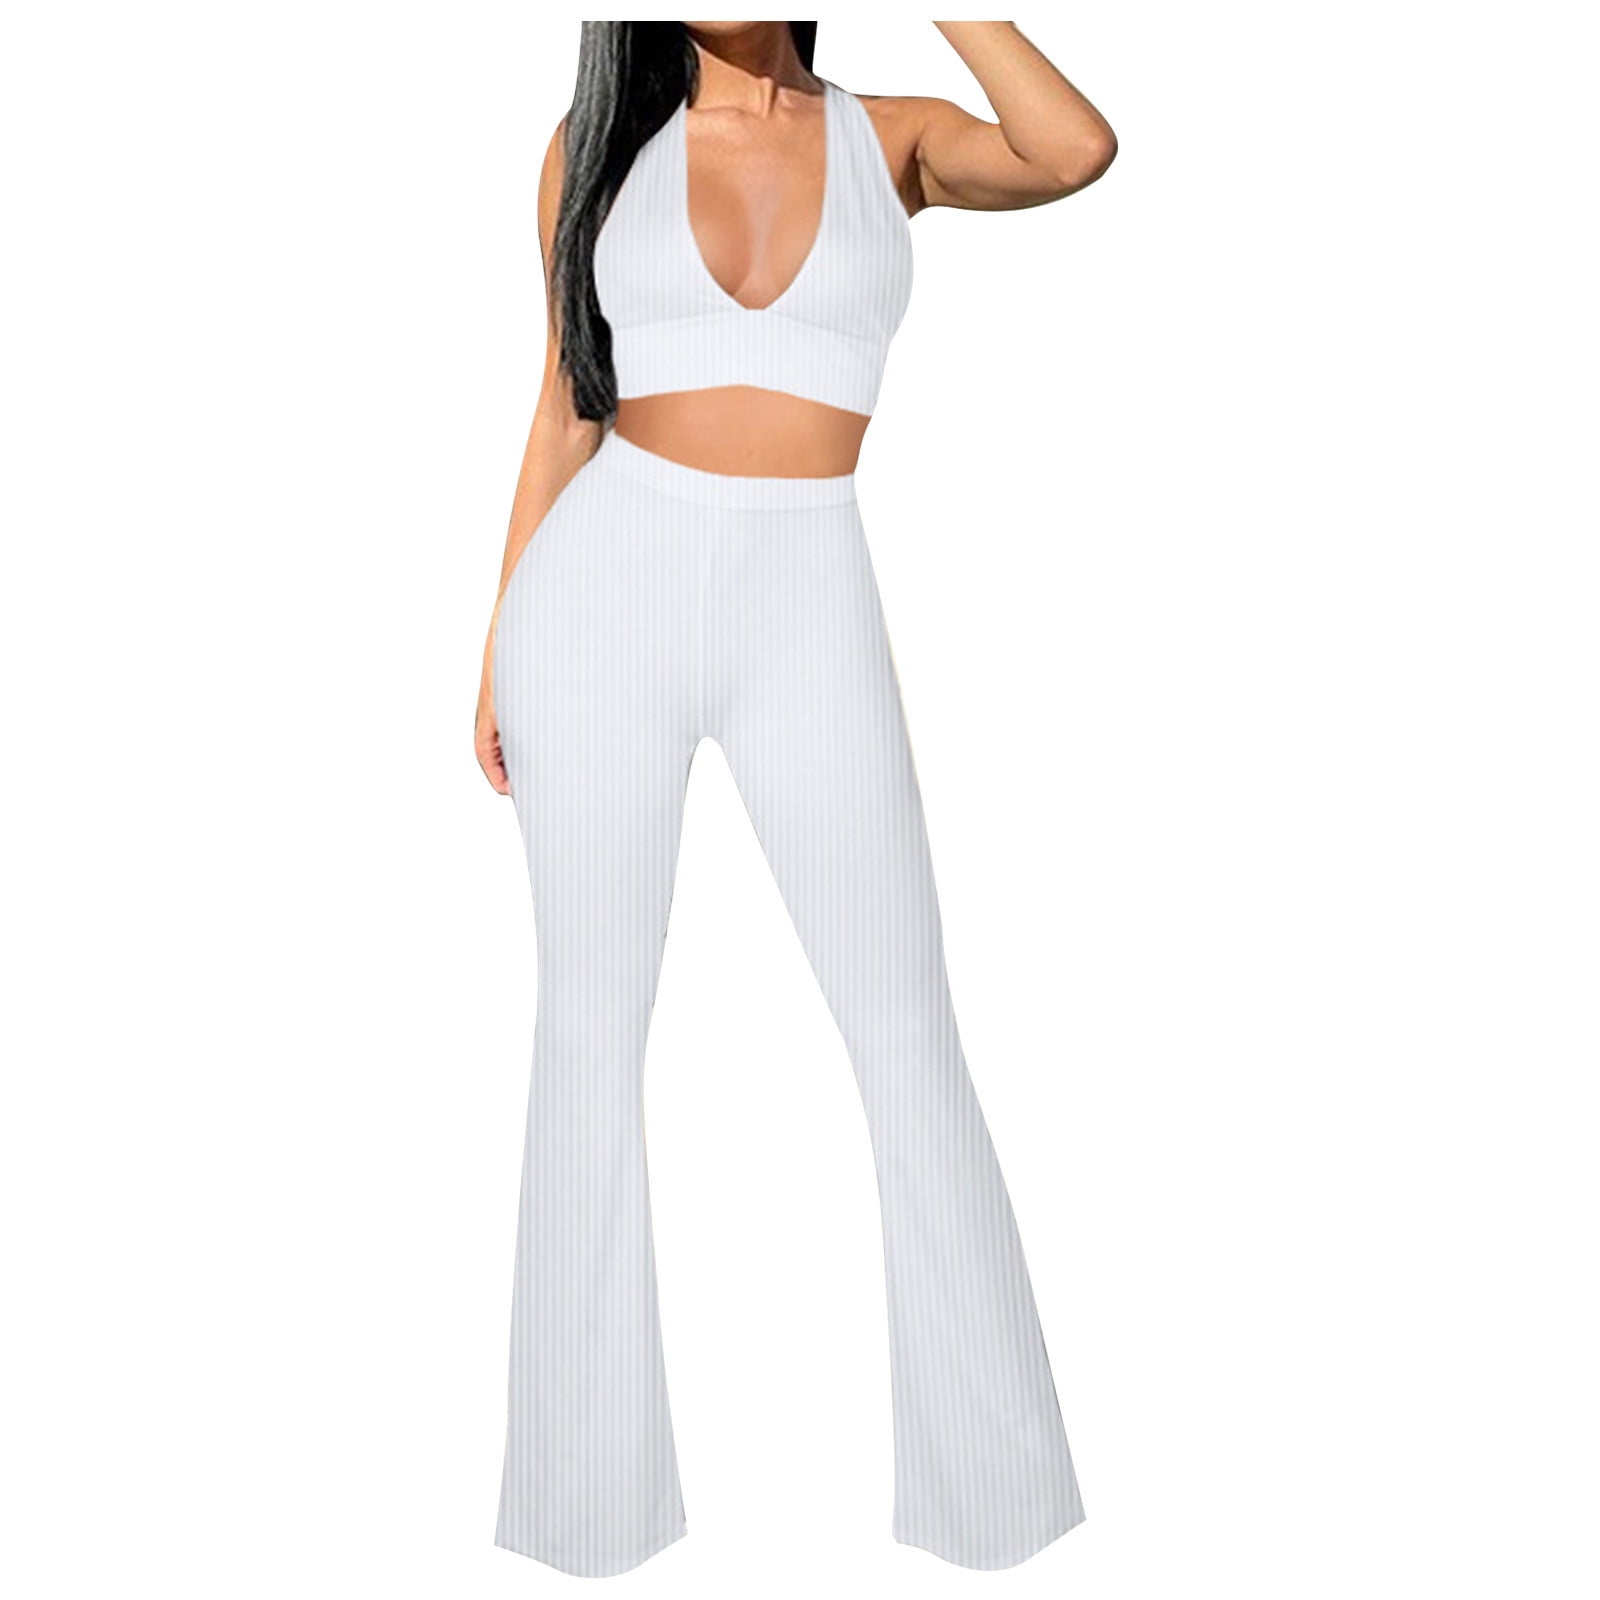 REORIAFEE Concert Outfits for Women Sexy Cute Summer Outfits Women